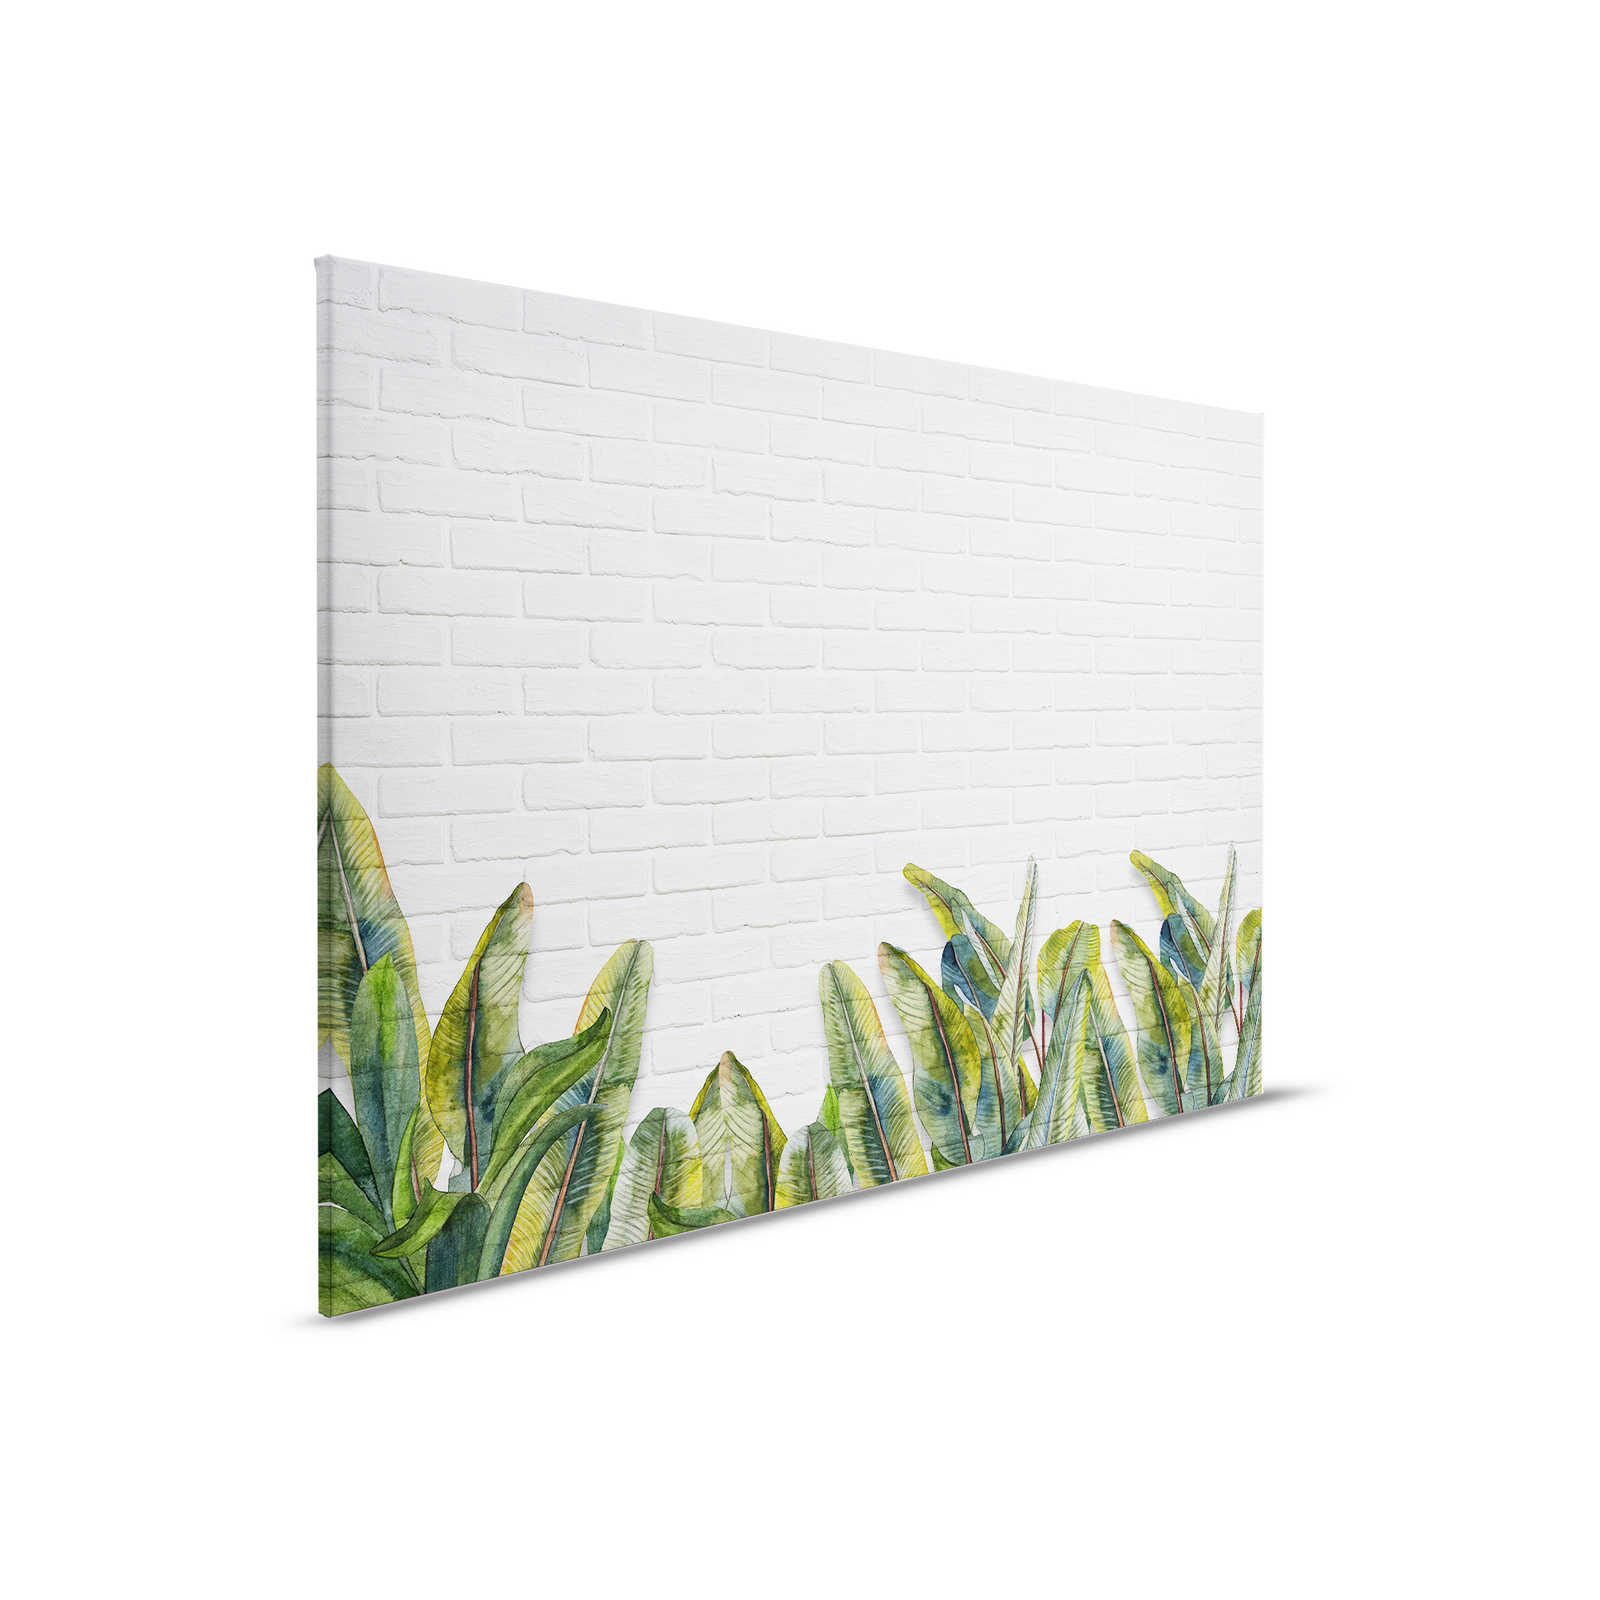 Canvas painting with leaves in front of white brick wall - 0.90 m x 0.60 m
